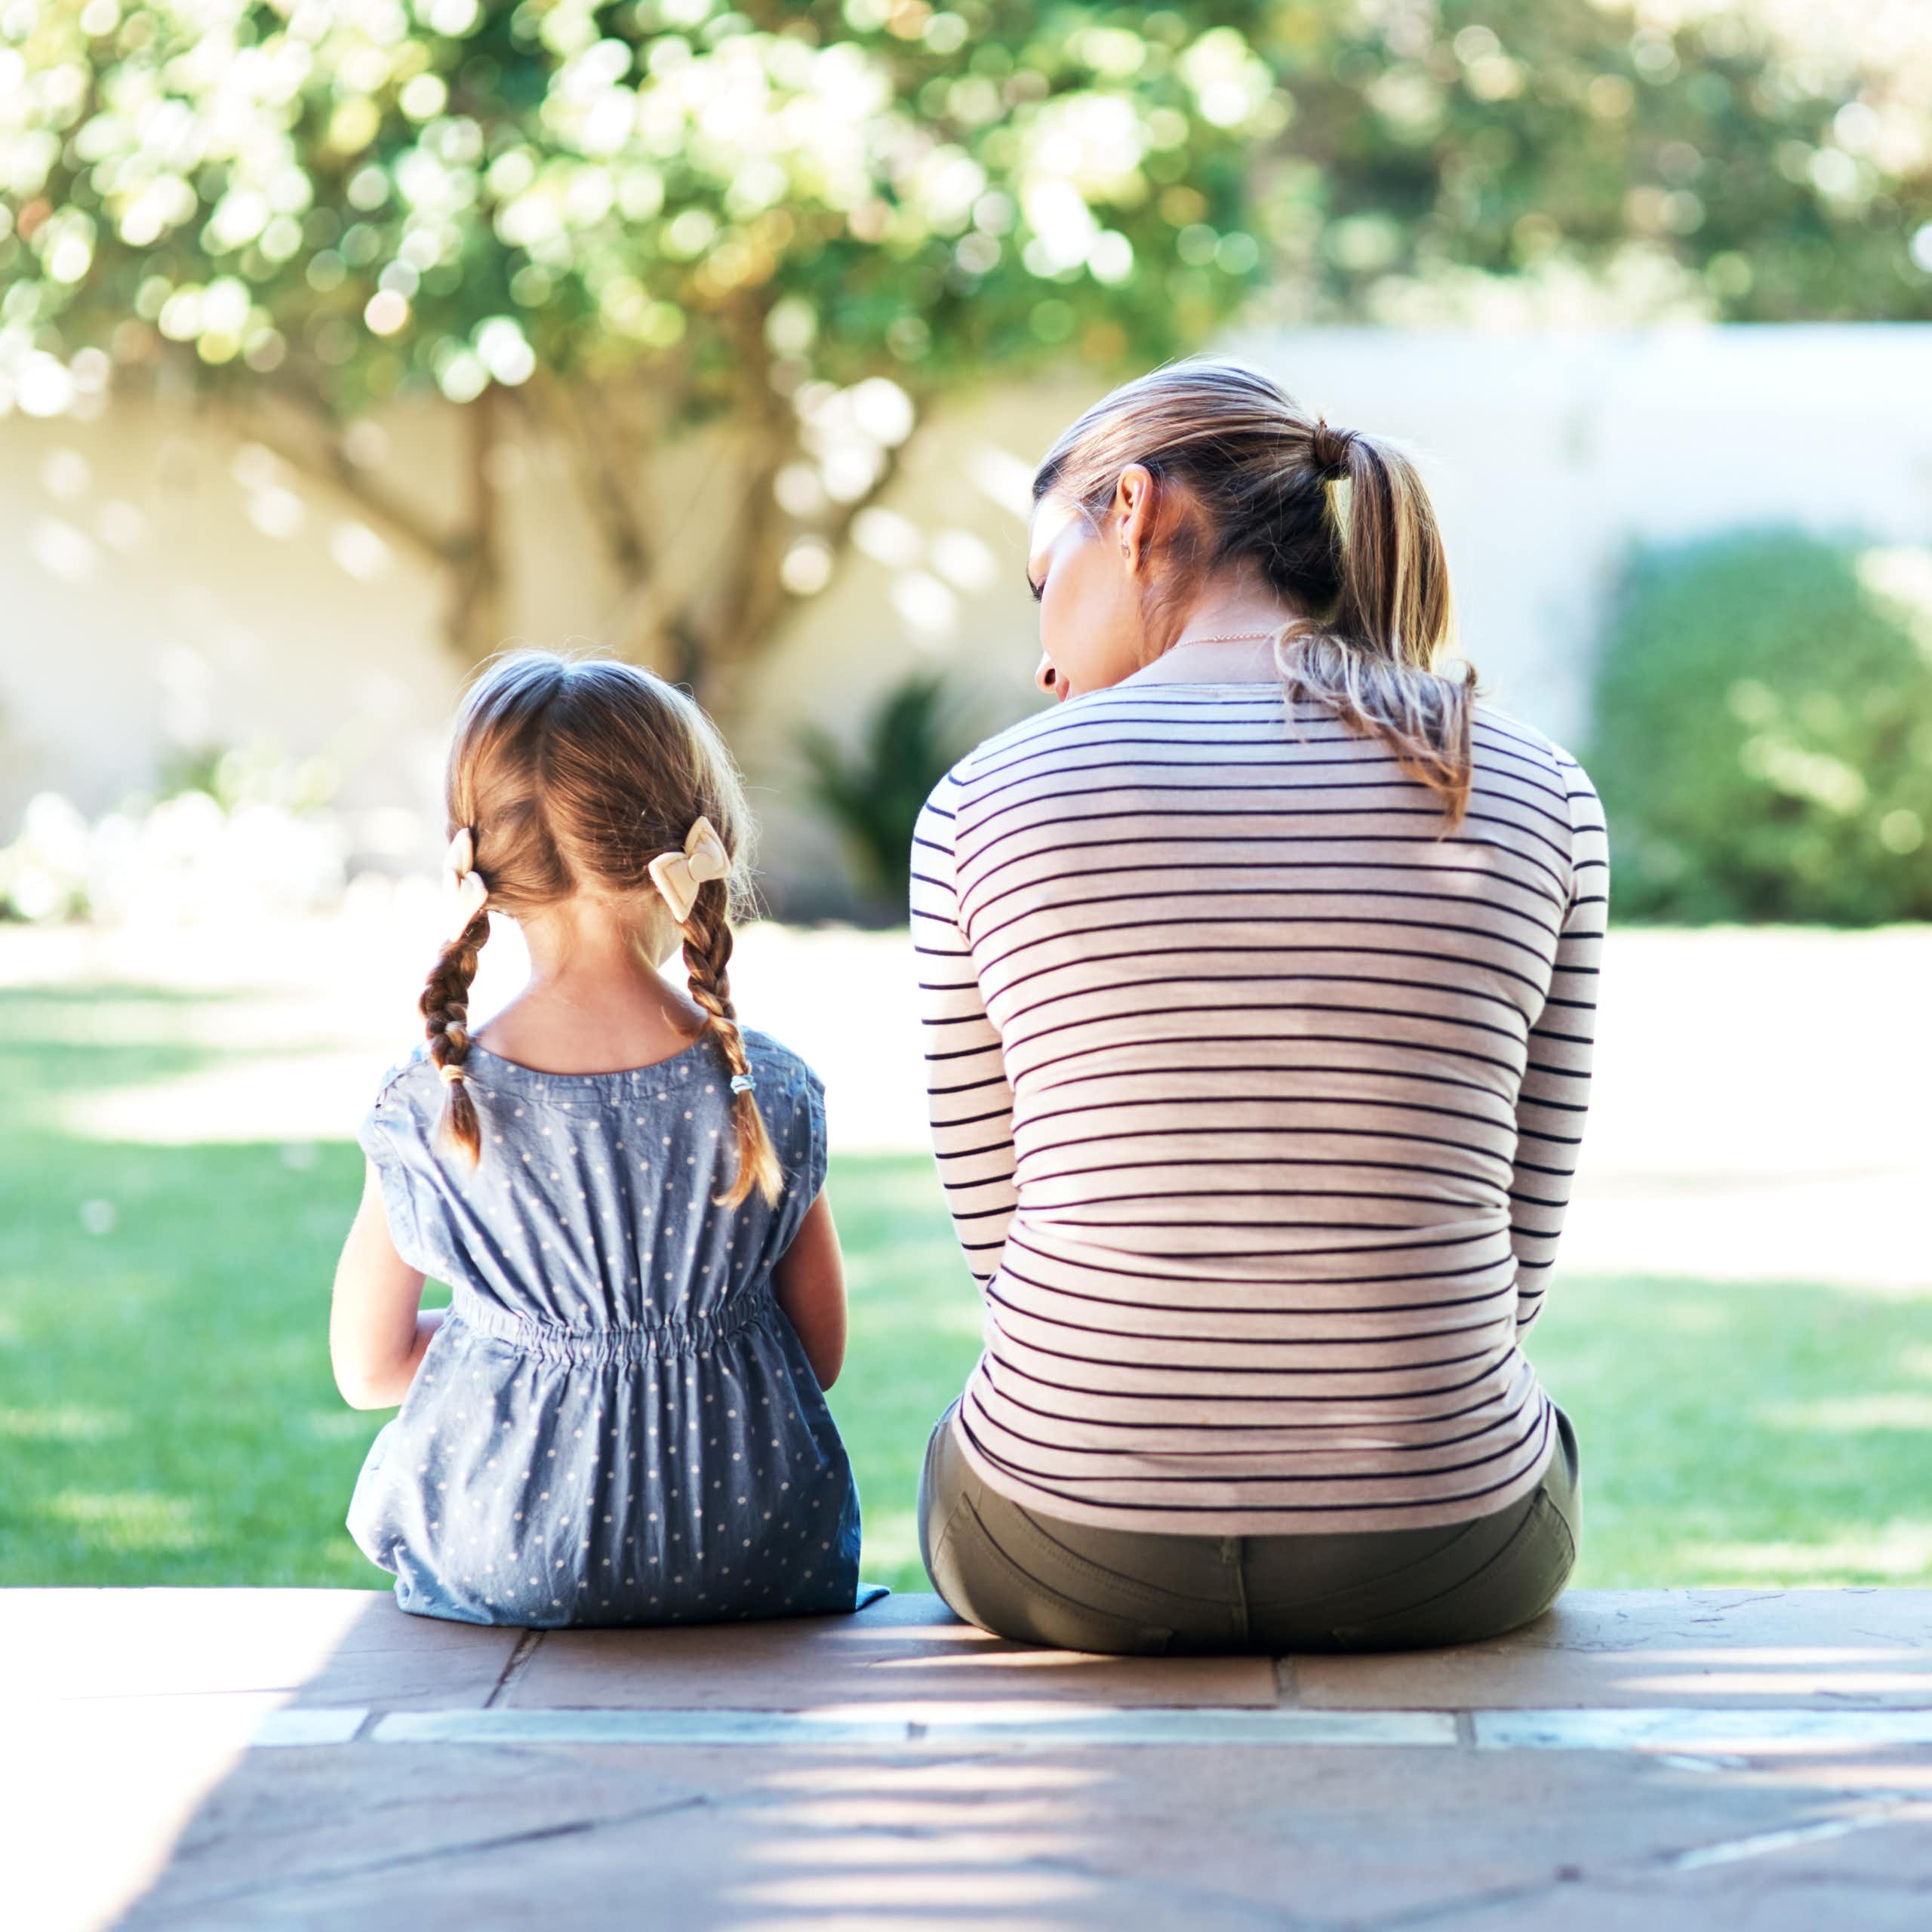 Rearview shot of a young woman and her daughter having a conversation on the porch.